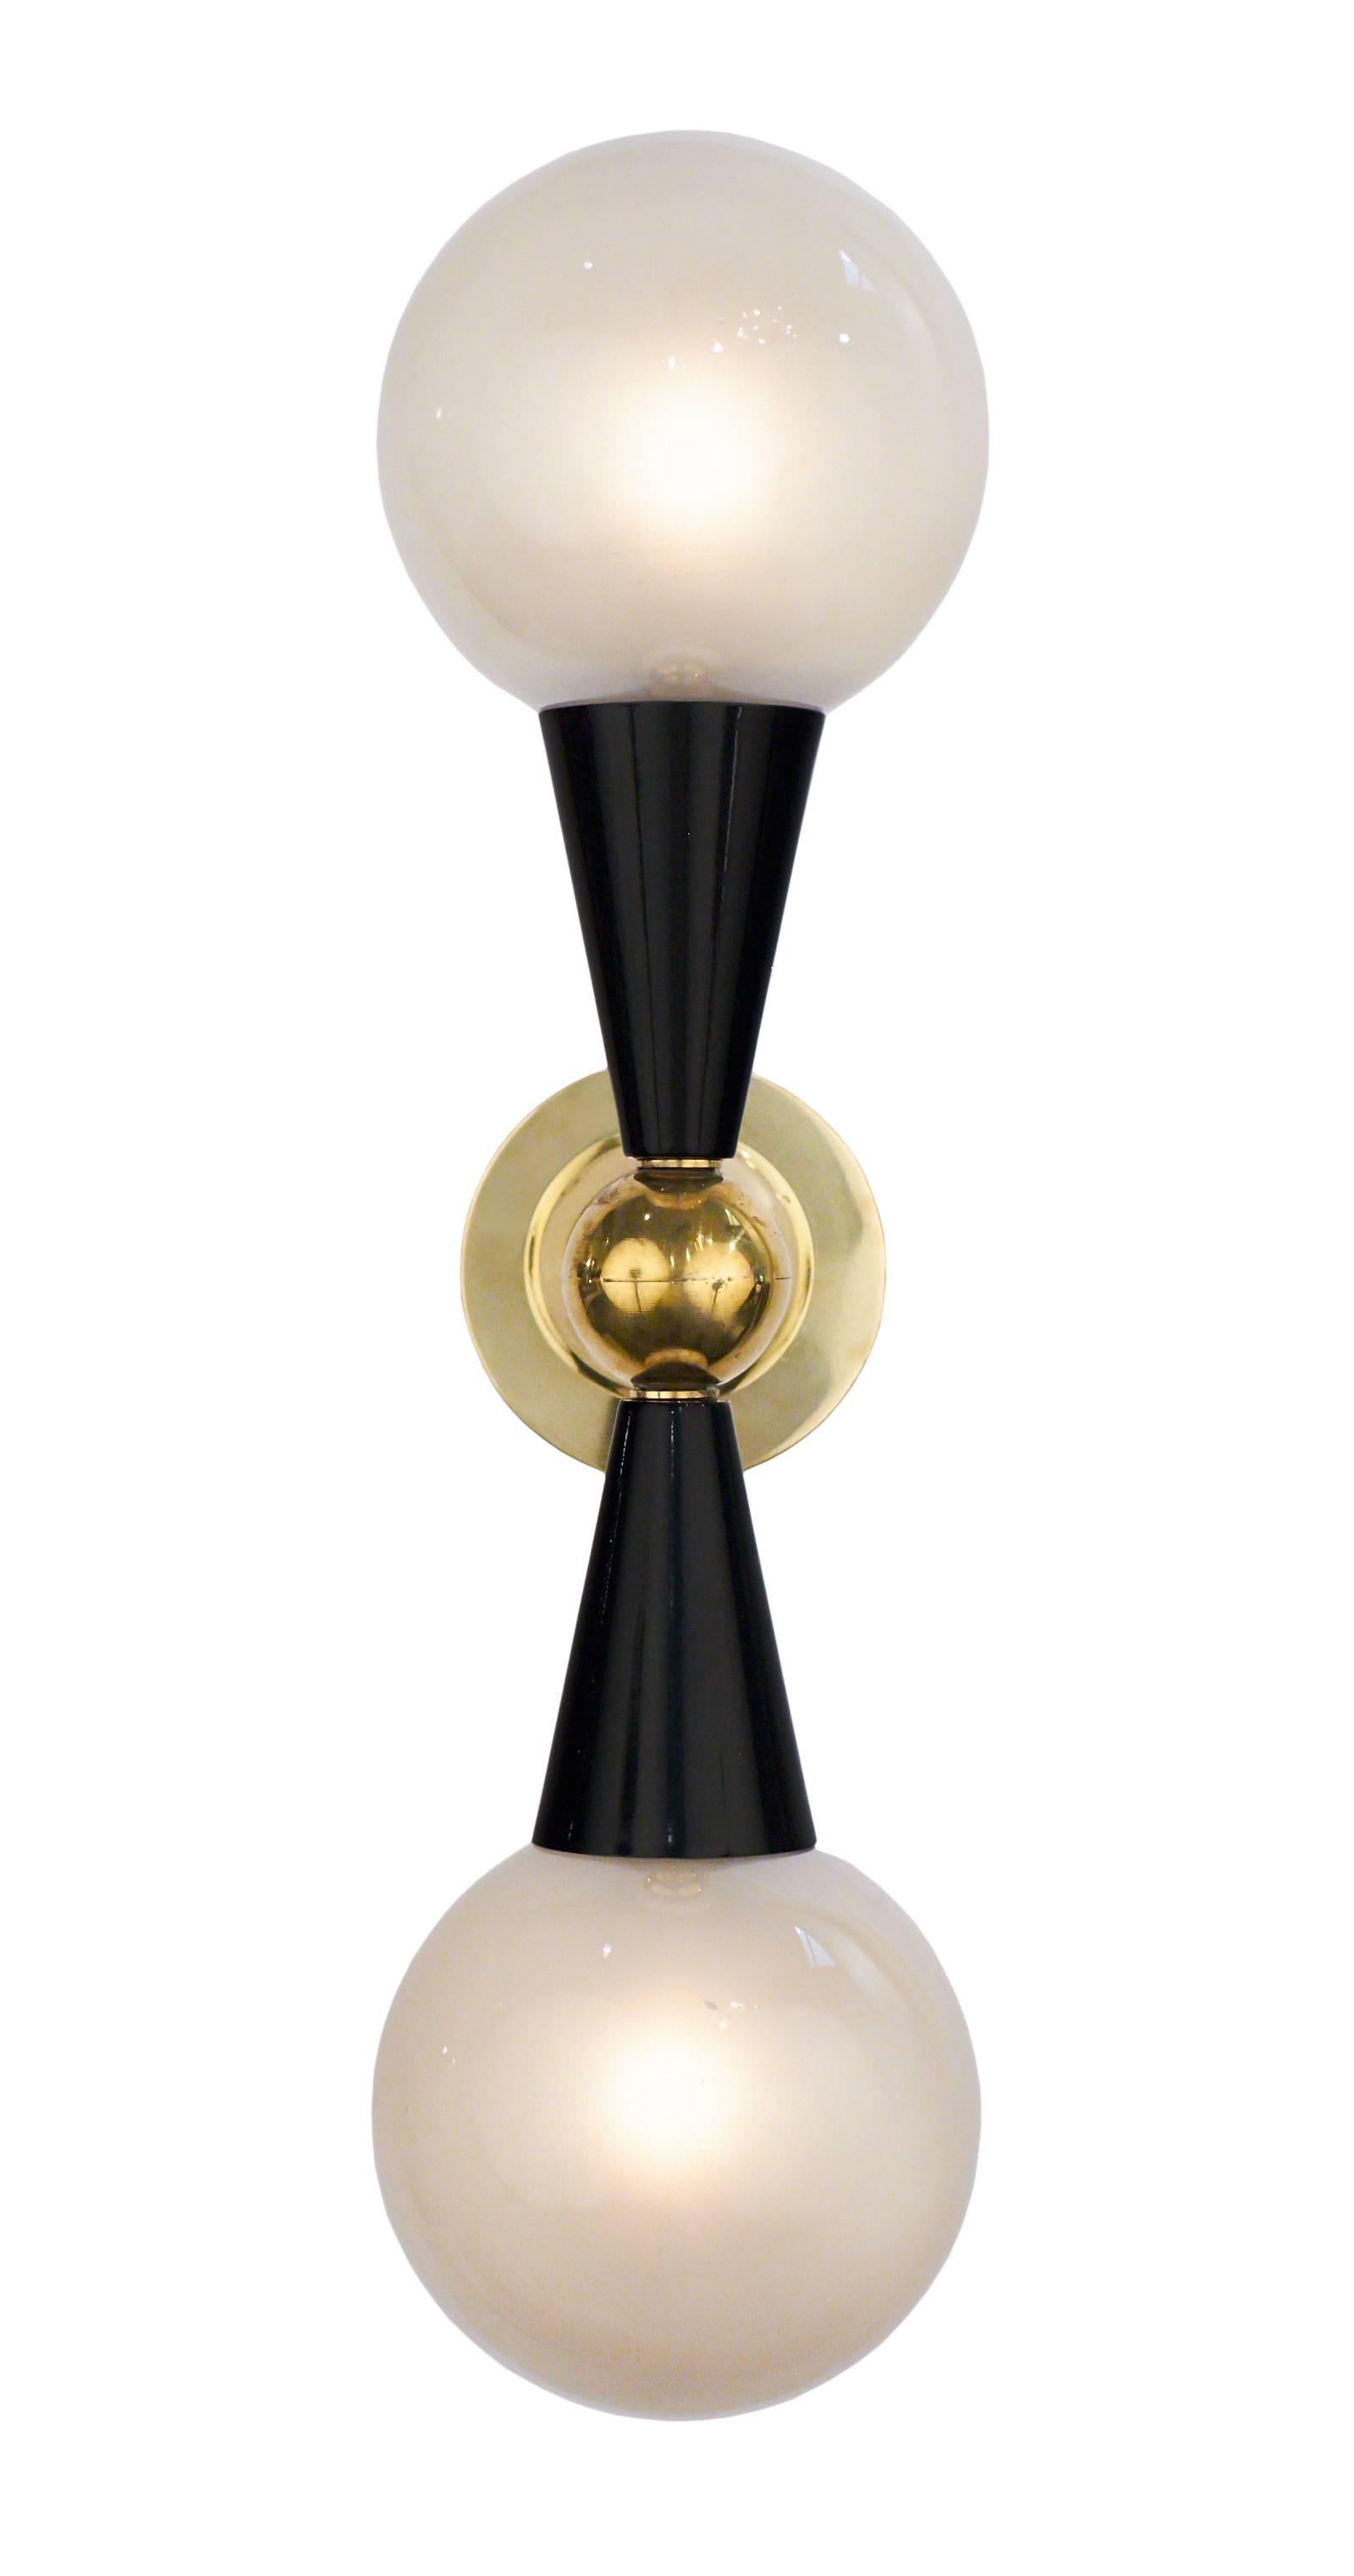 Murano glass globe shades and black lacquered cones extend from a brass structure on each of these Italian Mid-Century Modern style sconces. A matching chandelier is also available. In the manner of Stilnovo. Wired to fit US standards.

This pair